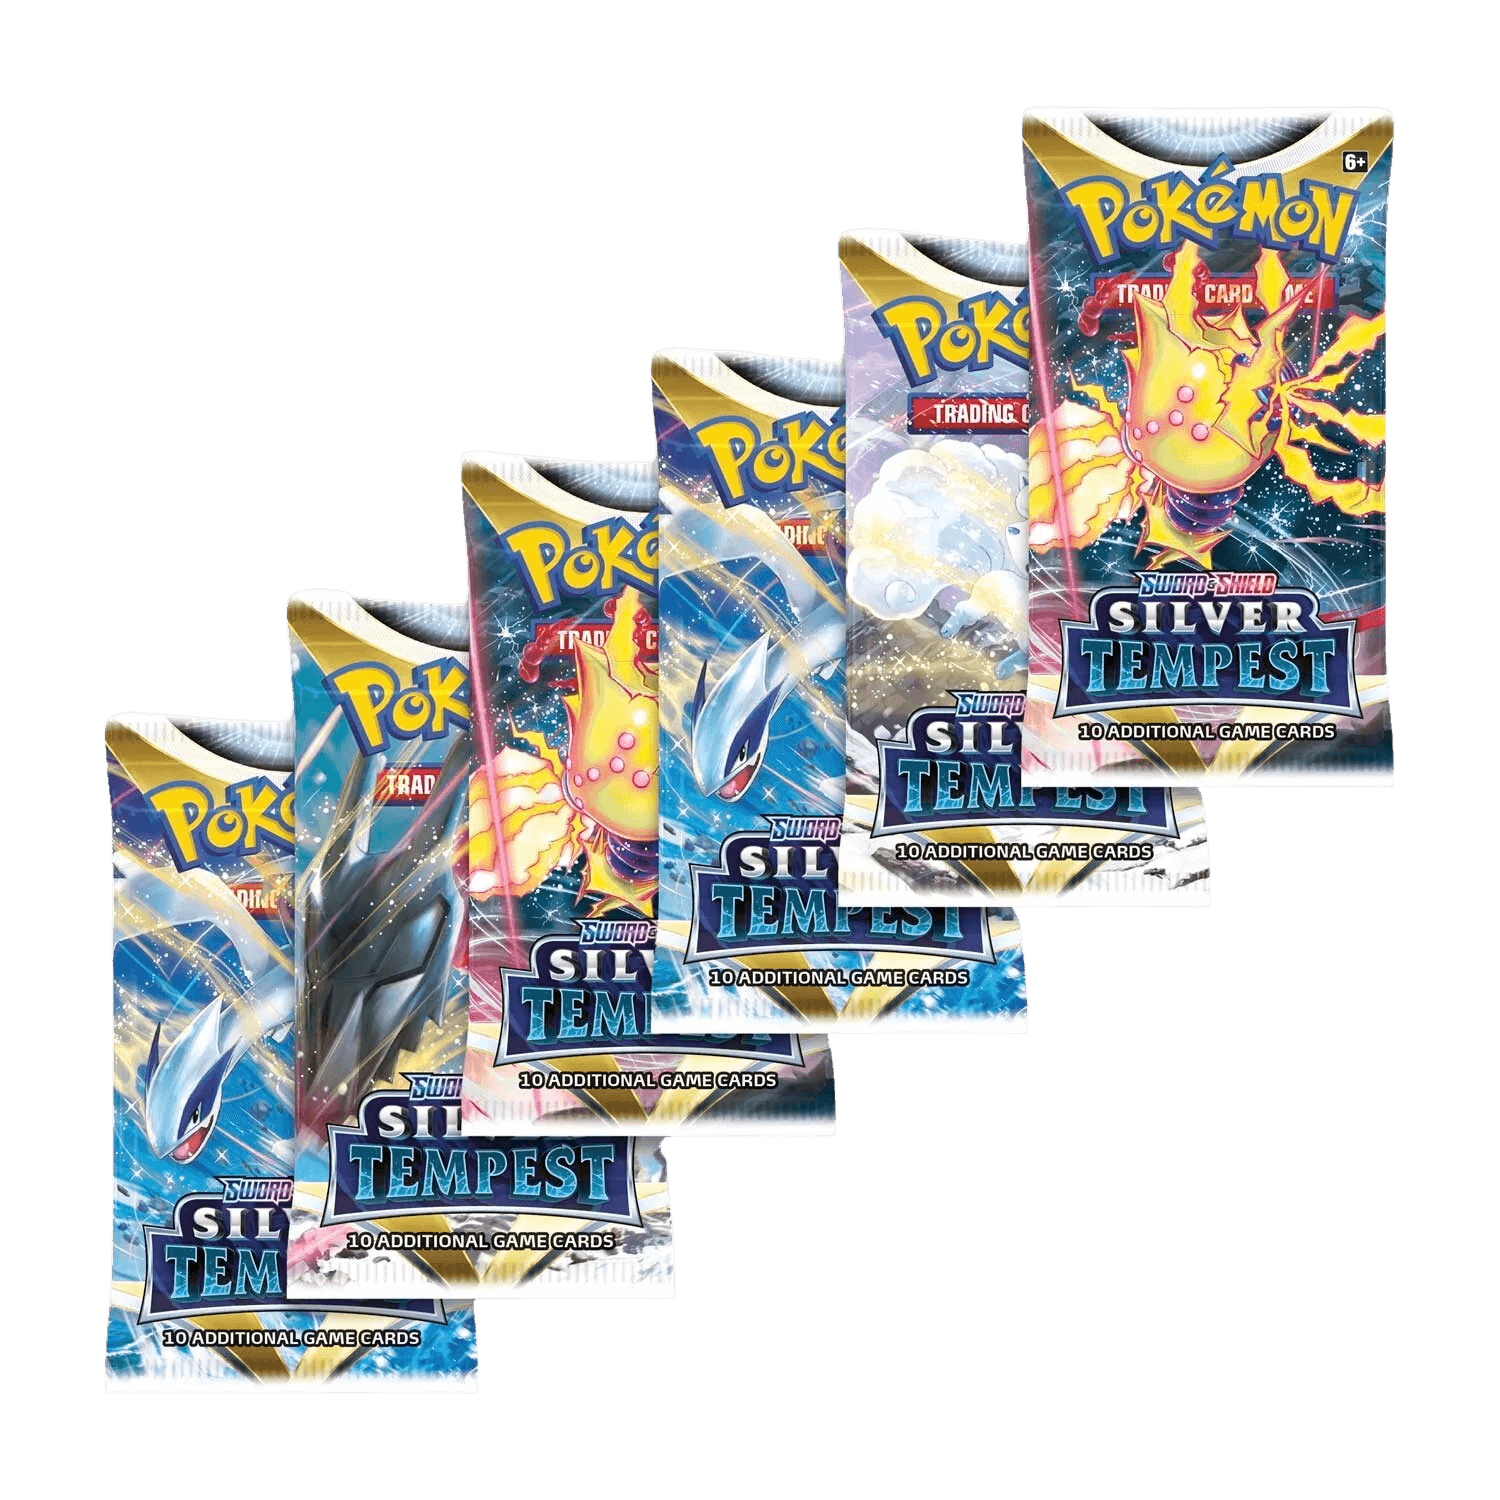 Pokemon TCG: Silver Tempest Booster Bundle - The Card Vault